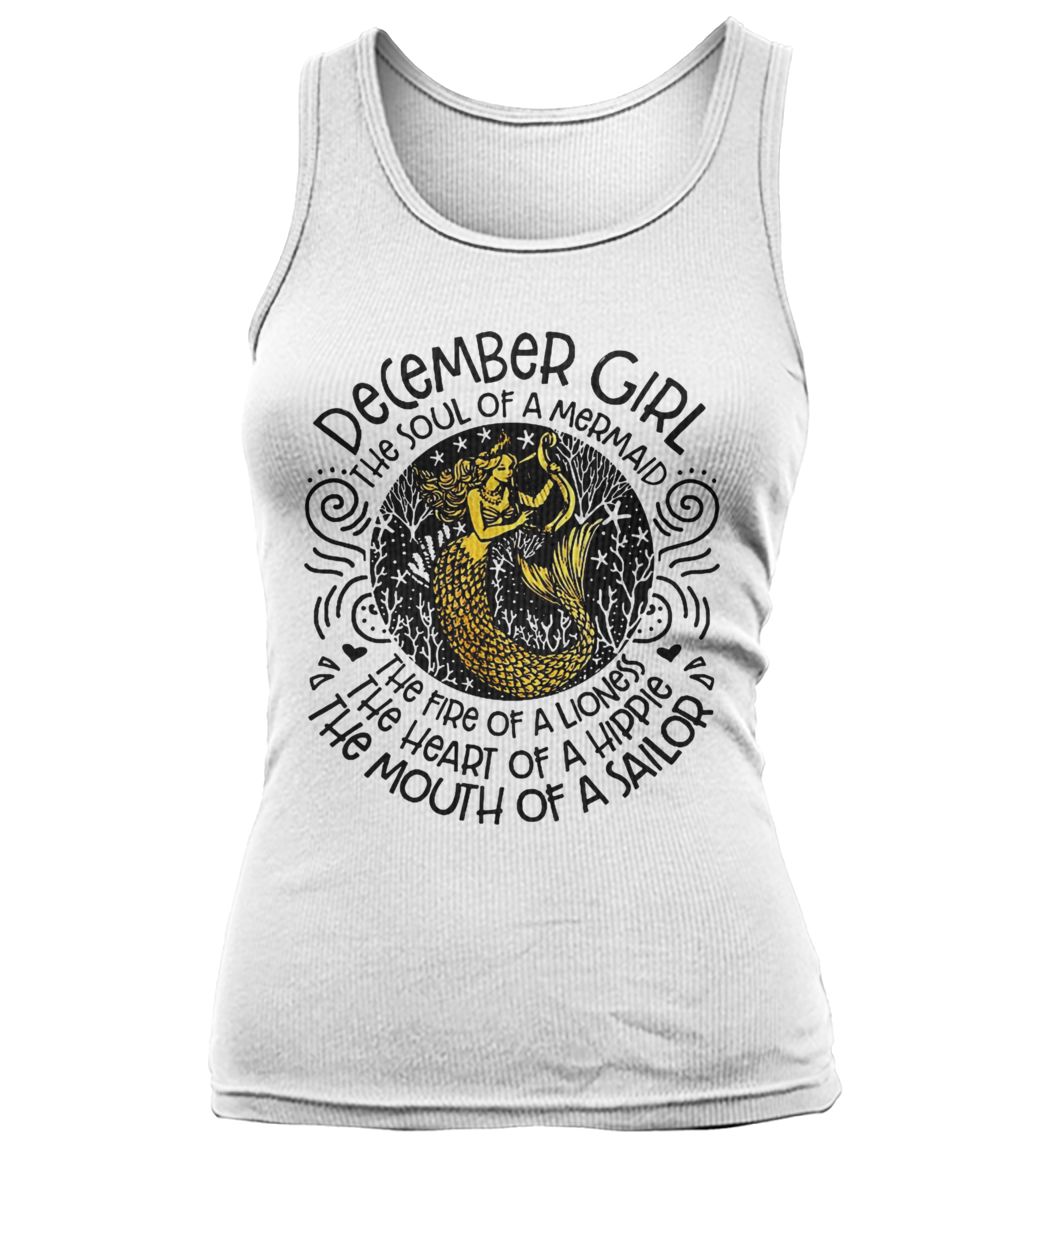 December girl the soul of a mermaid the fire of a lioness the heart of a hippie the mouth of a sailor women's tank top